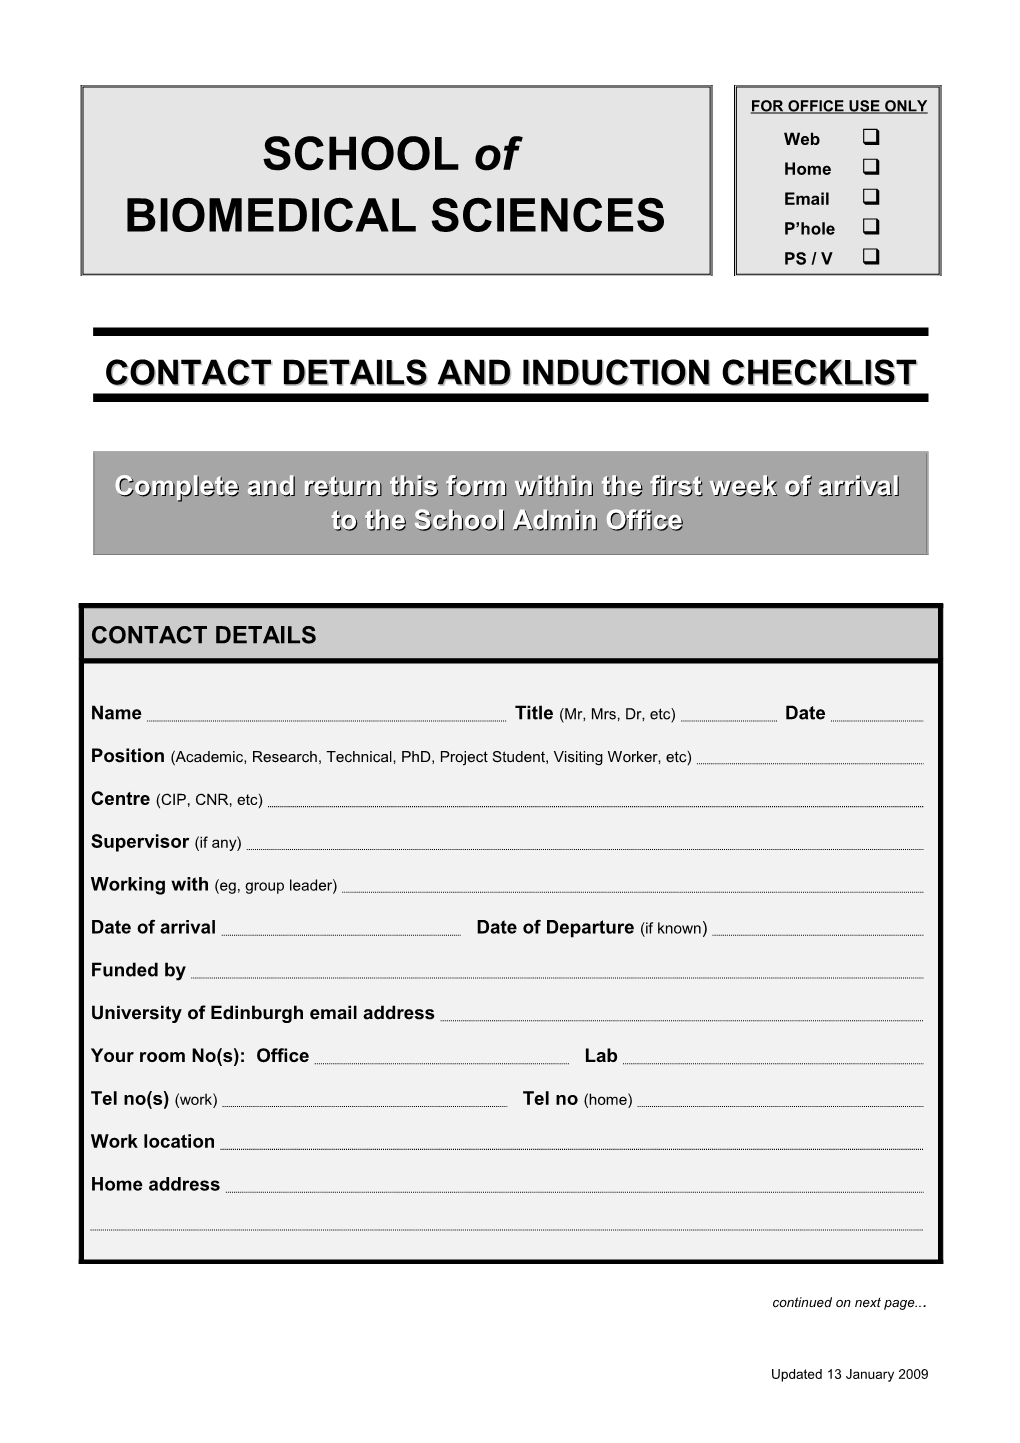 Division of Biomedical and Clinical Laboratory Sciences